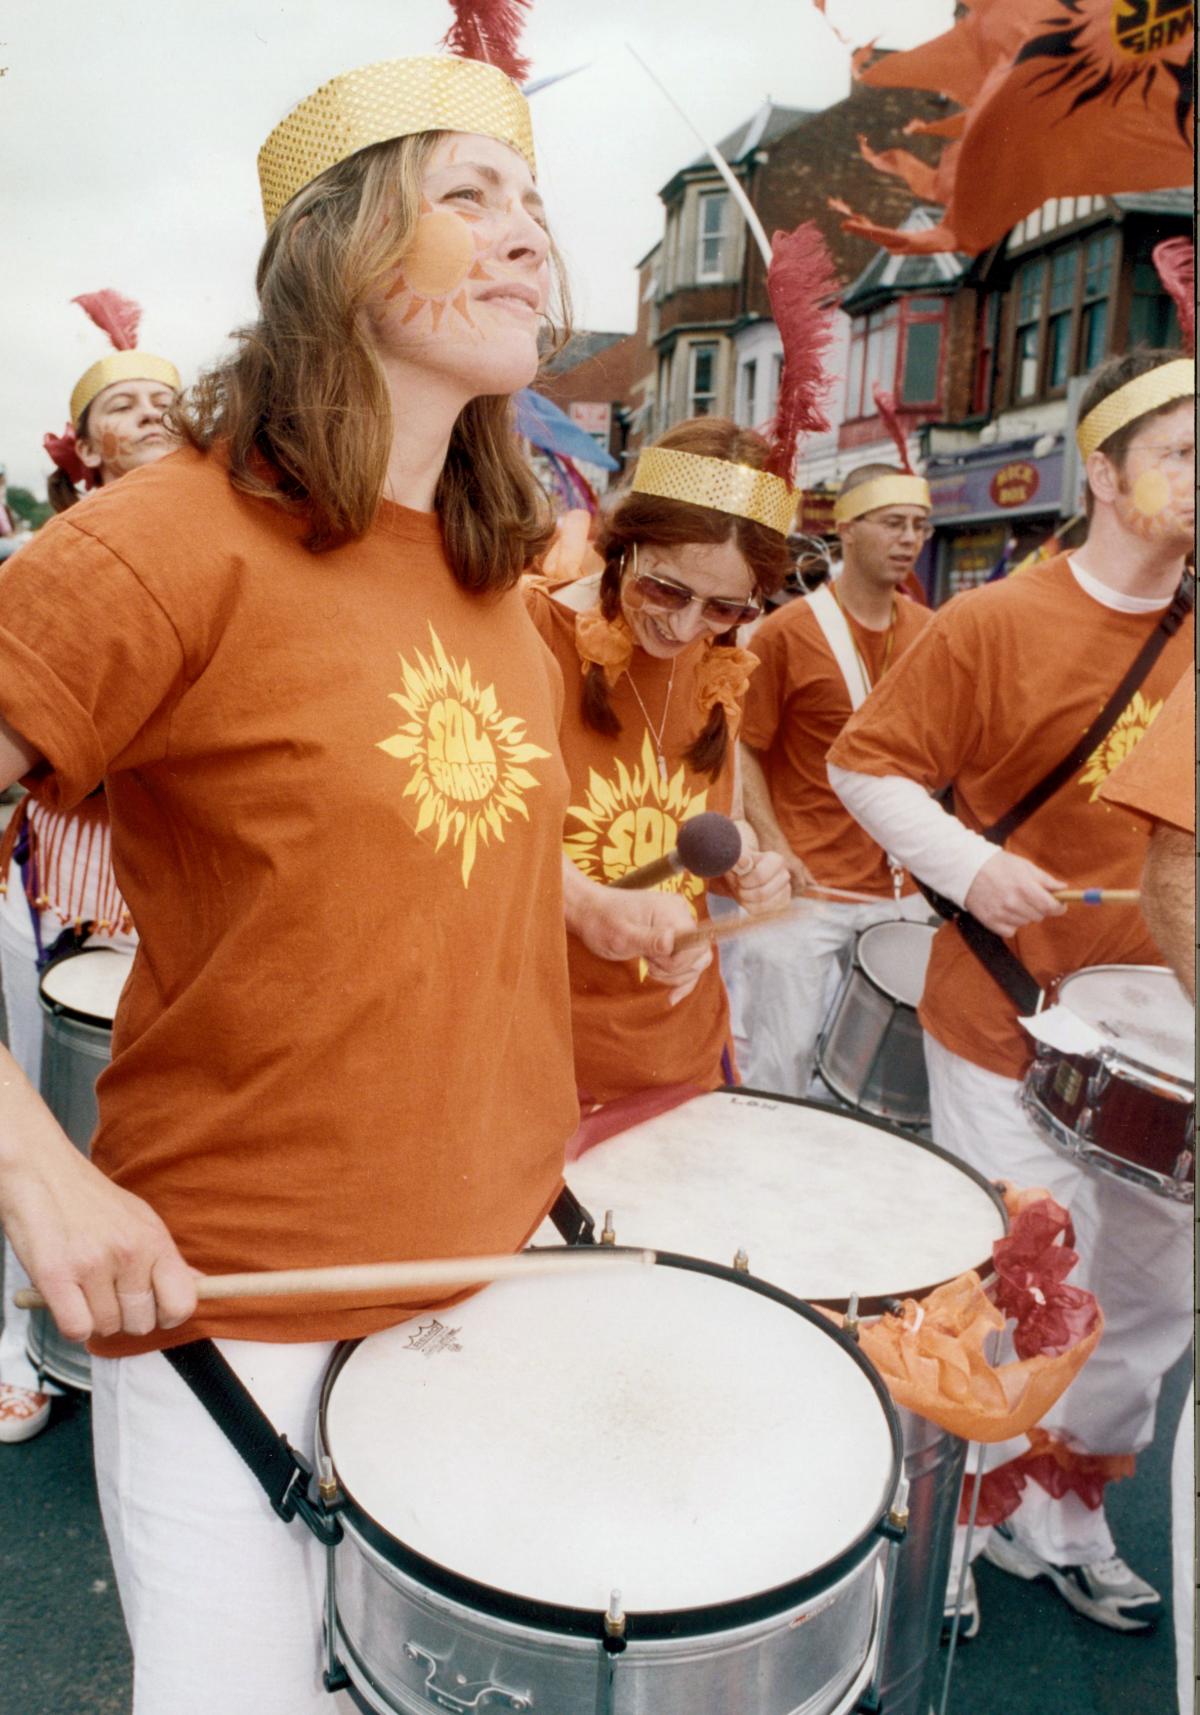 Pictures from the 2002 Carnival